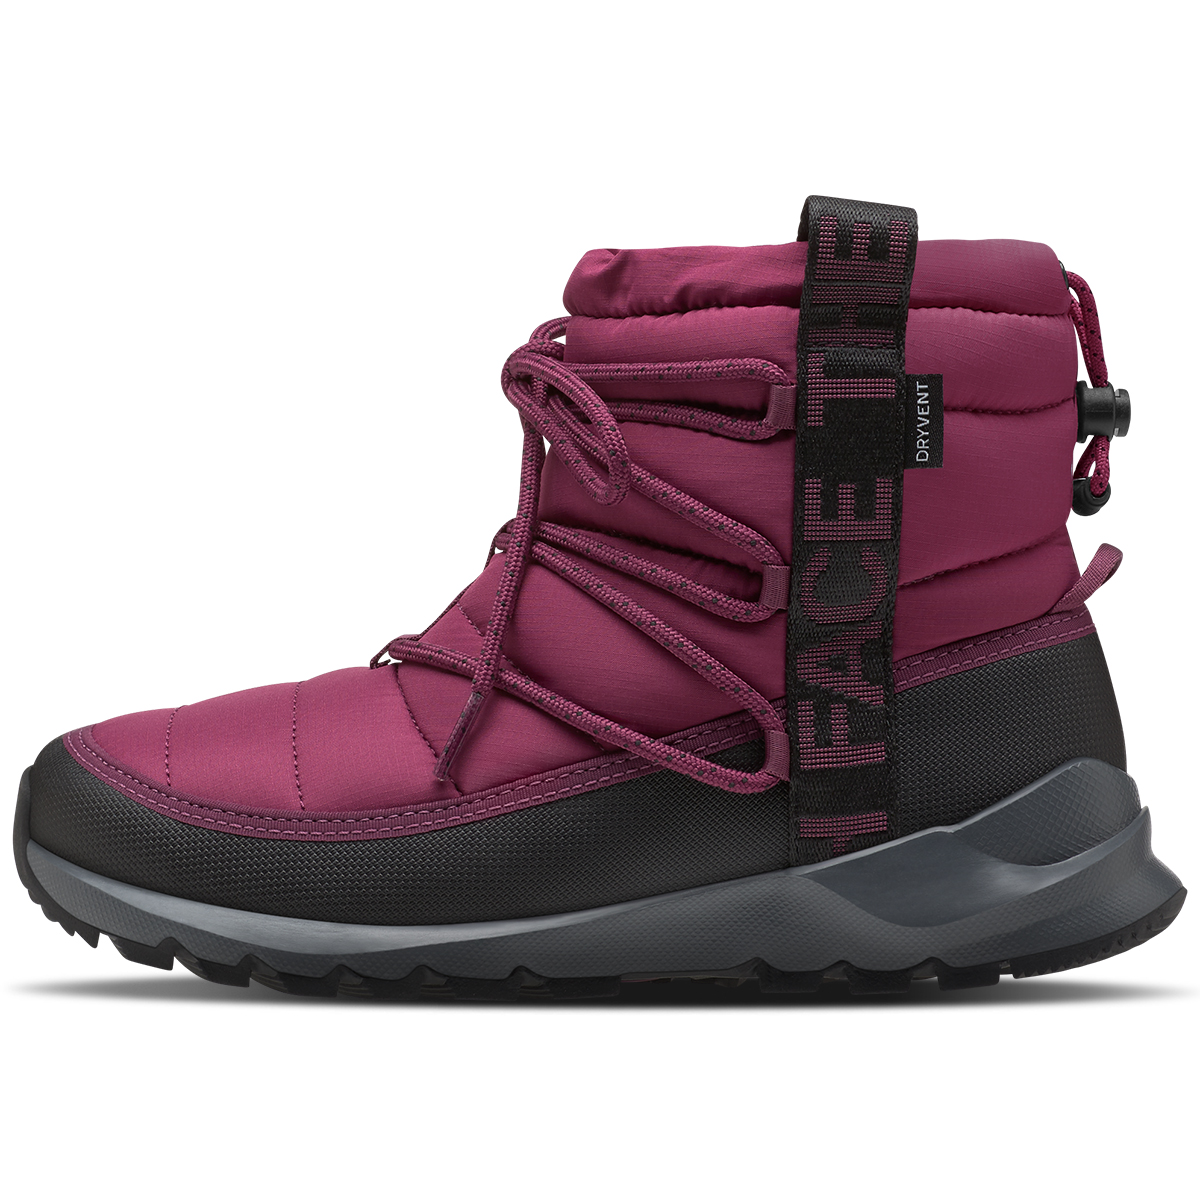 The North Face Women's Thermoball Lace-Up Waterproof Boots - Size 10